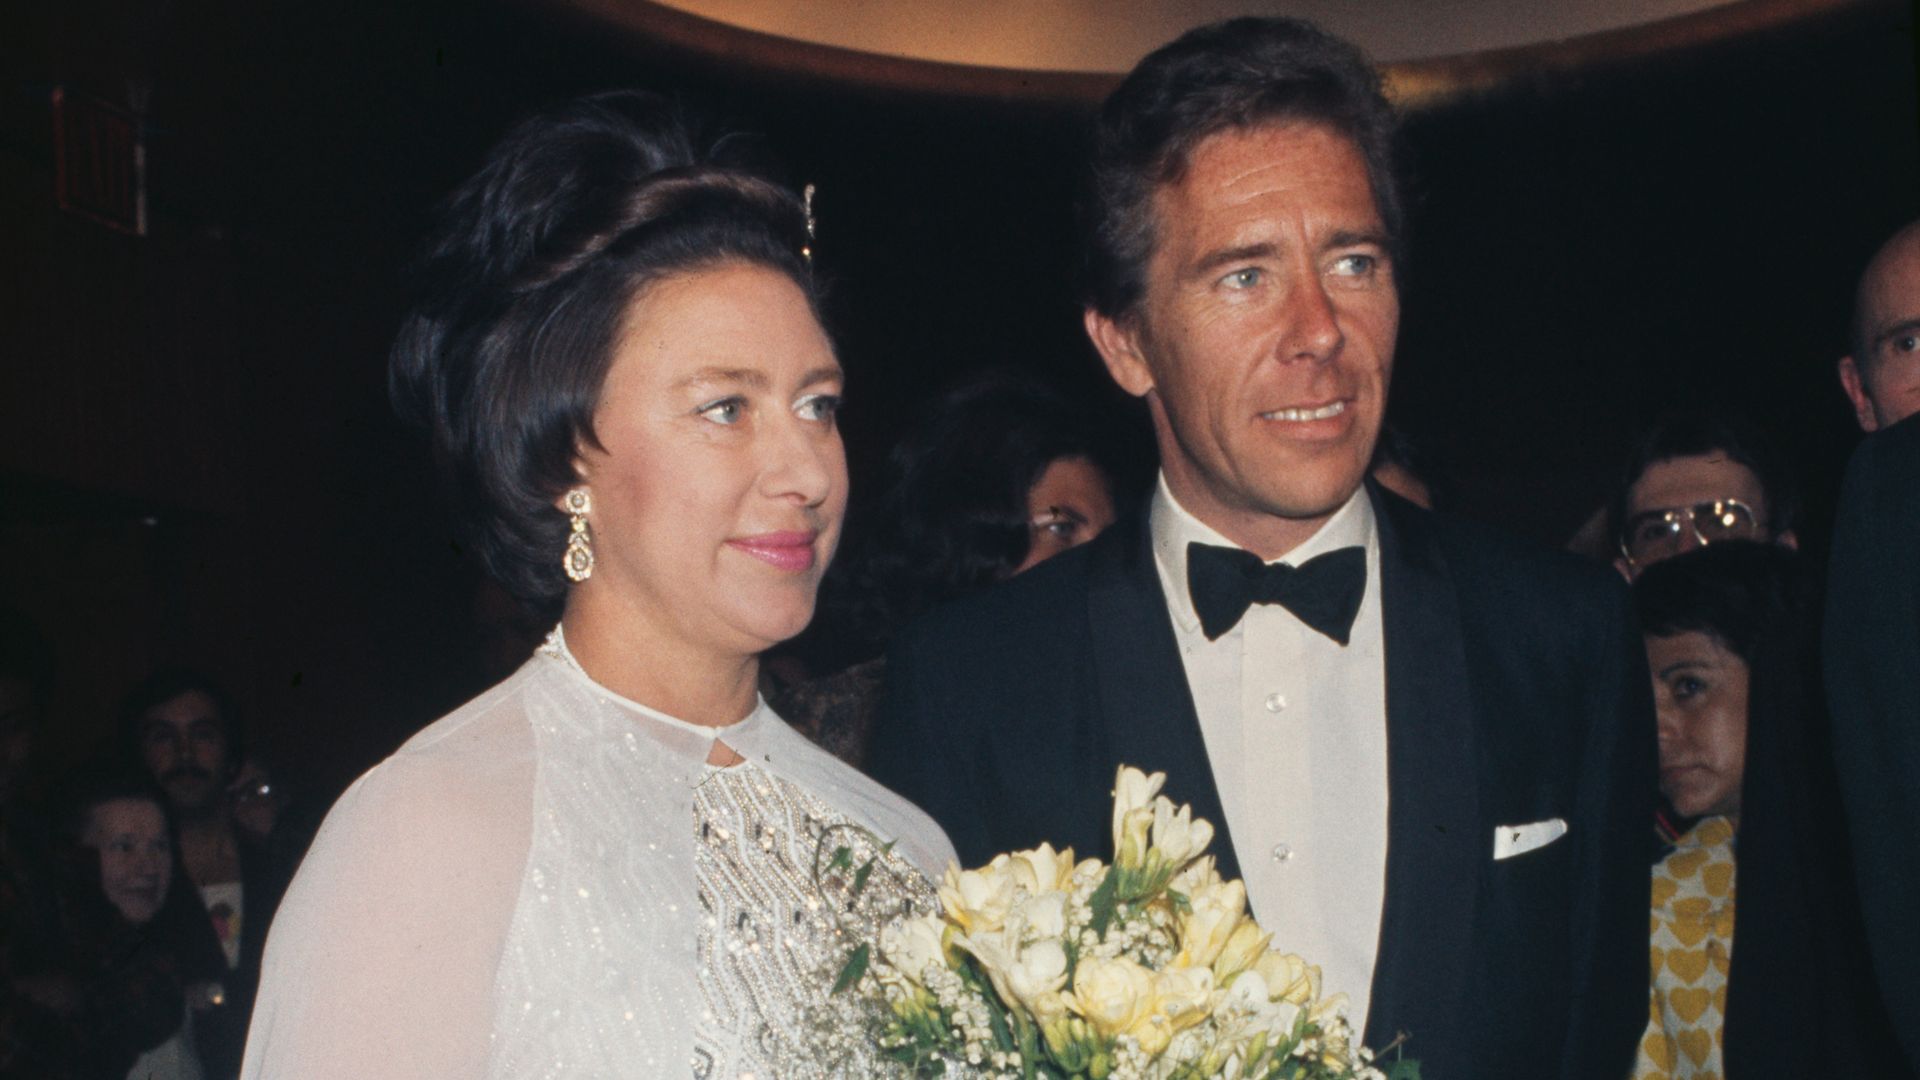 Princess Margaret and Antony Armstrong Jones marriage – a look back at their relationship timeline